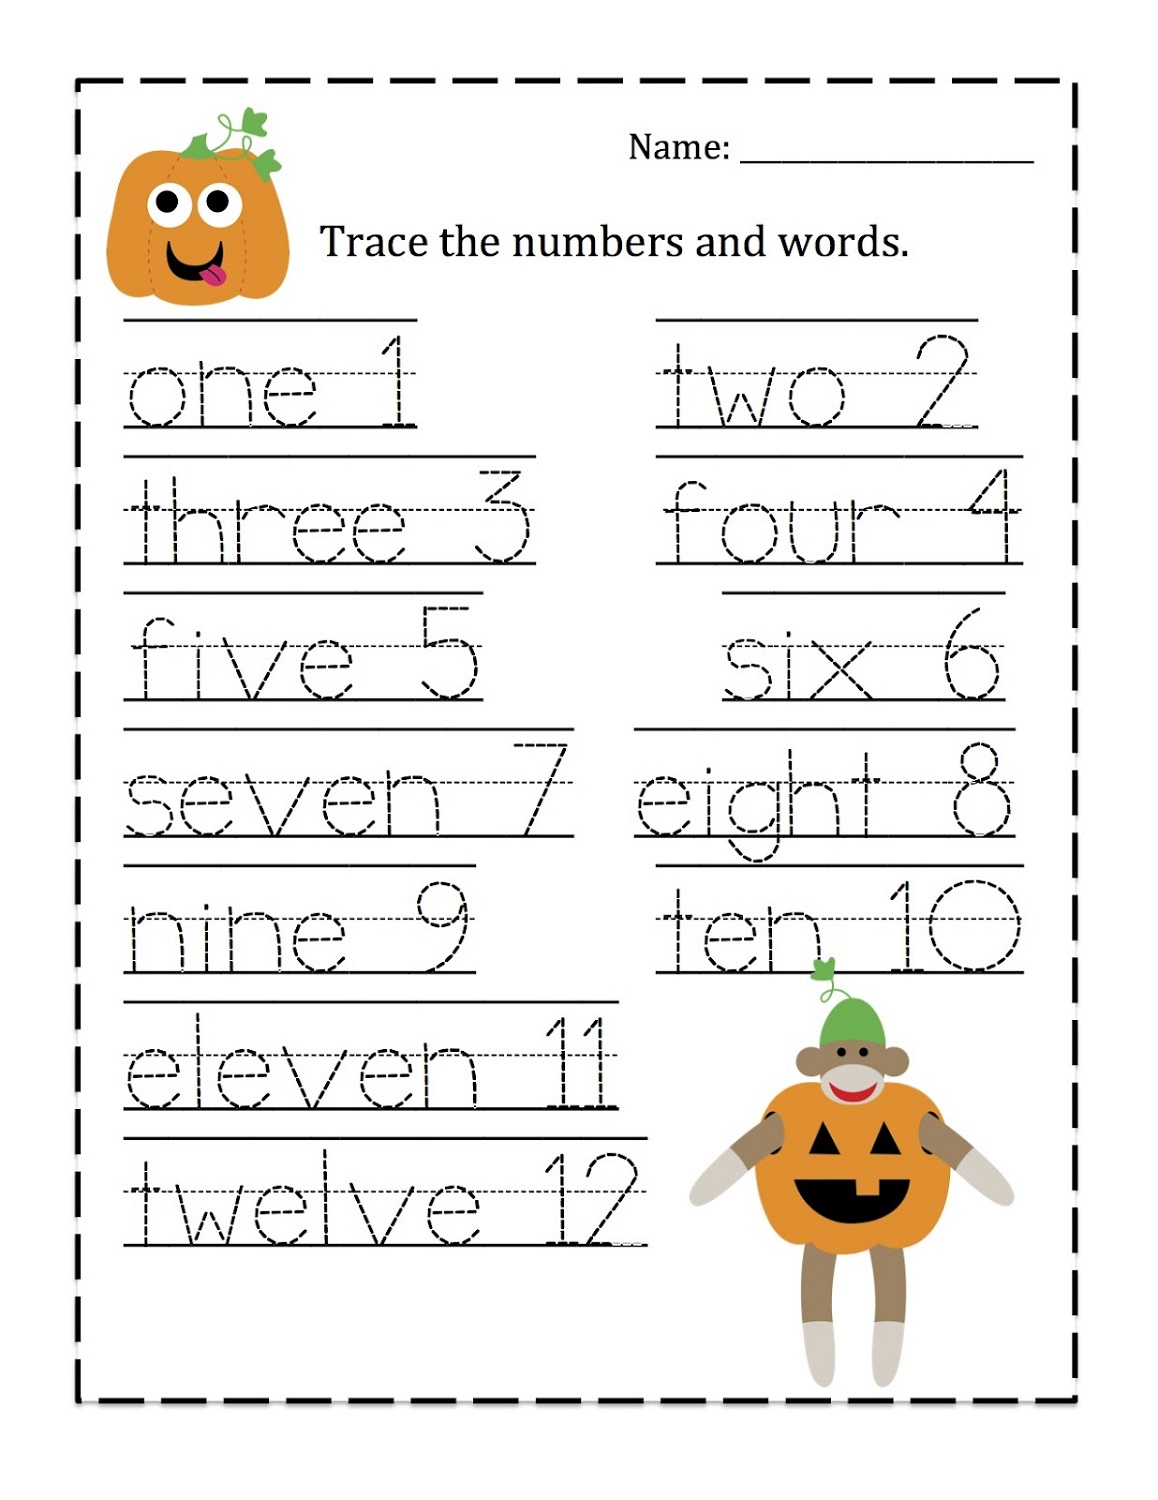 numbers-1-5-traceable-learning-printable-trace-number-1-20-worksheets-activity-shelter